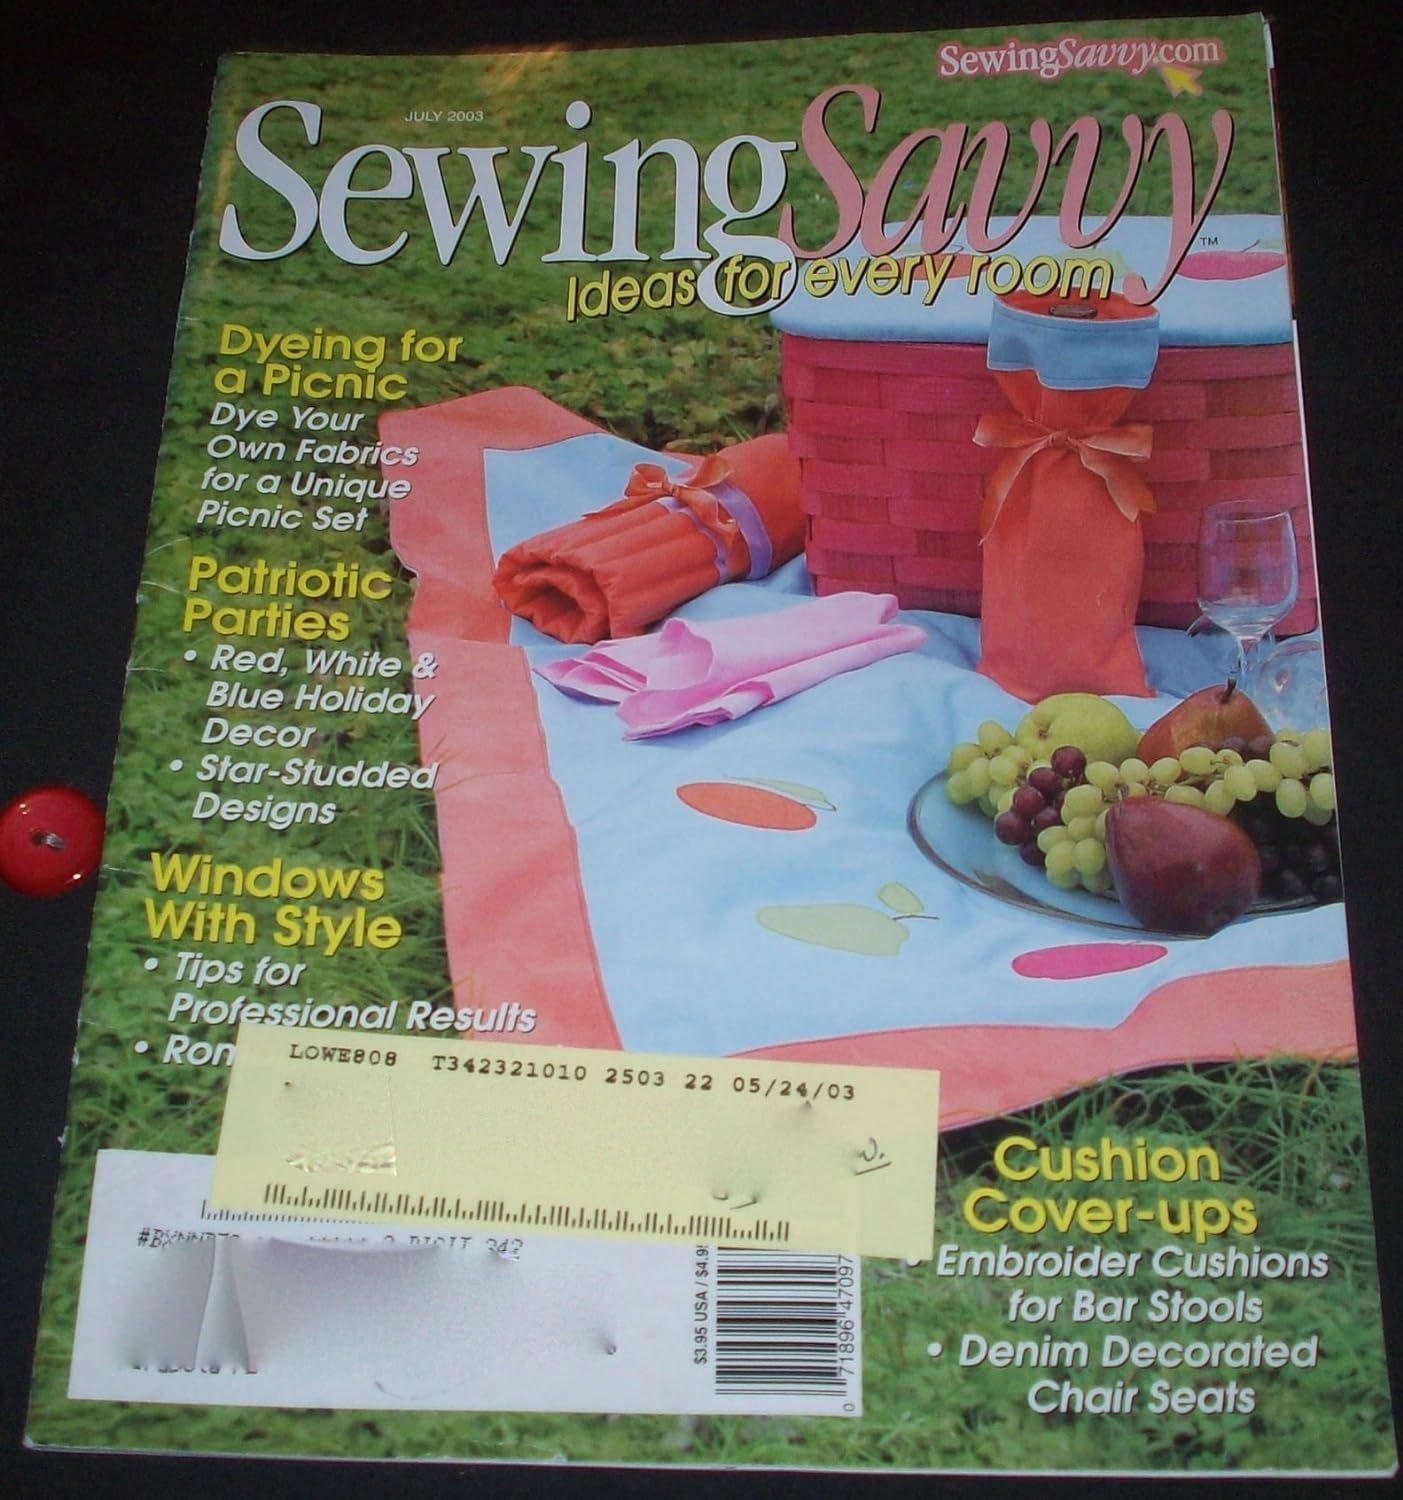 Primary image for Sewing Savvy, July 2003